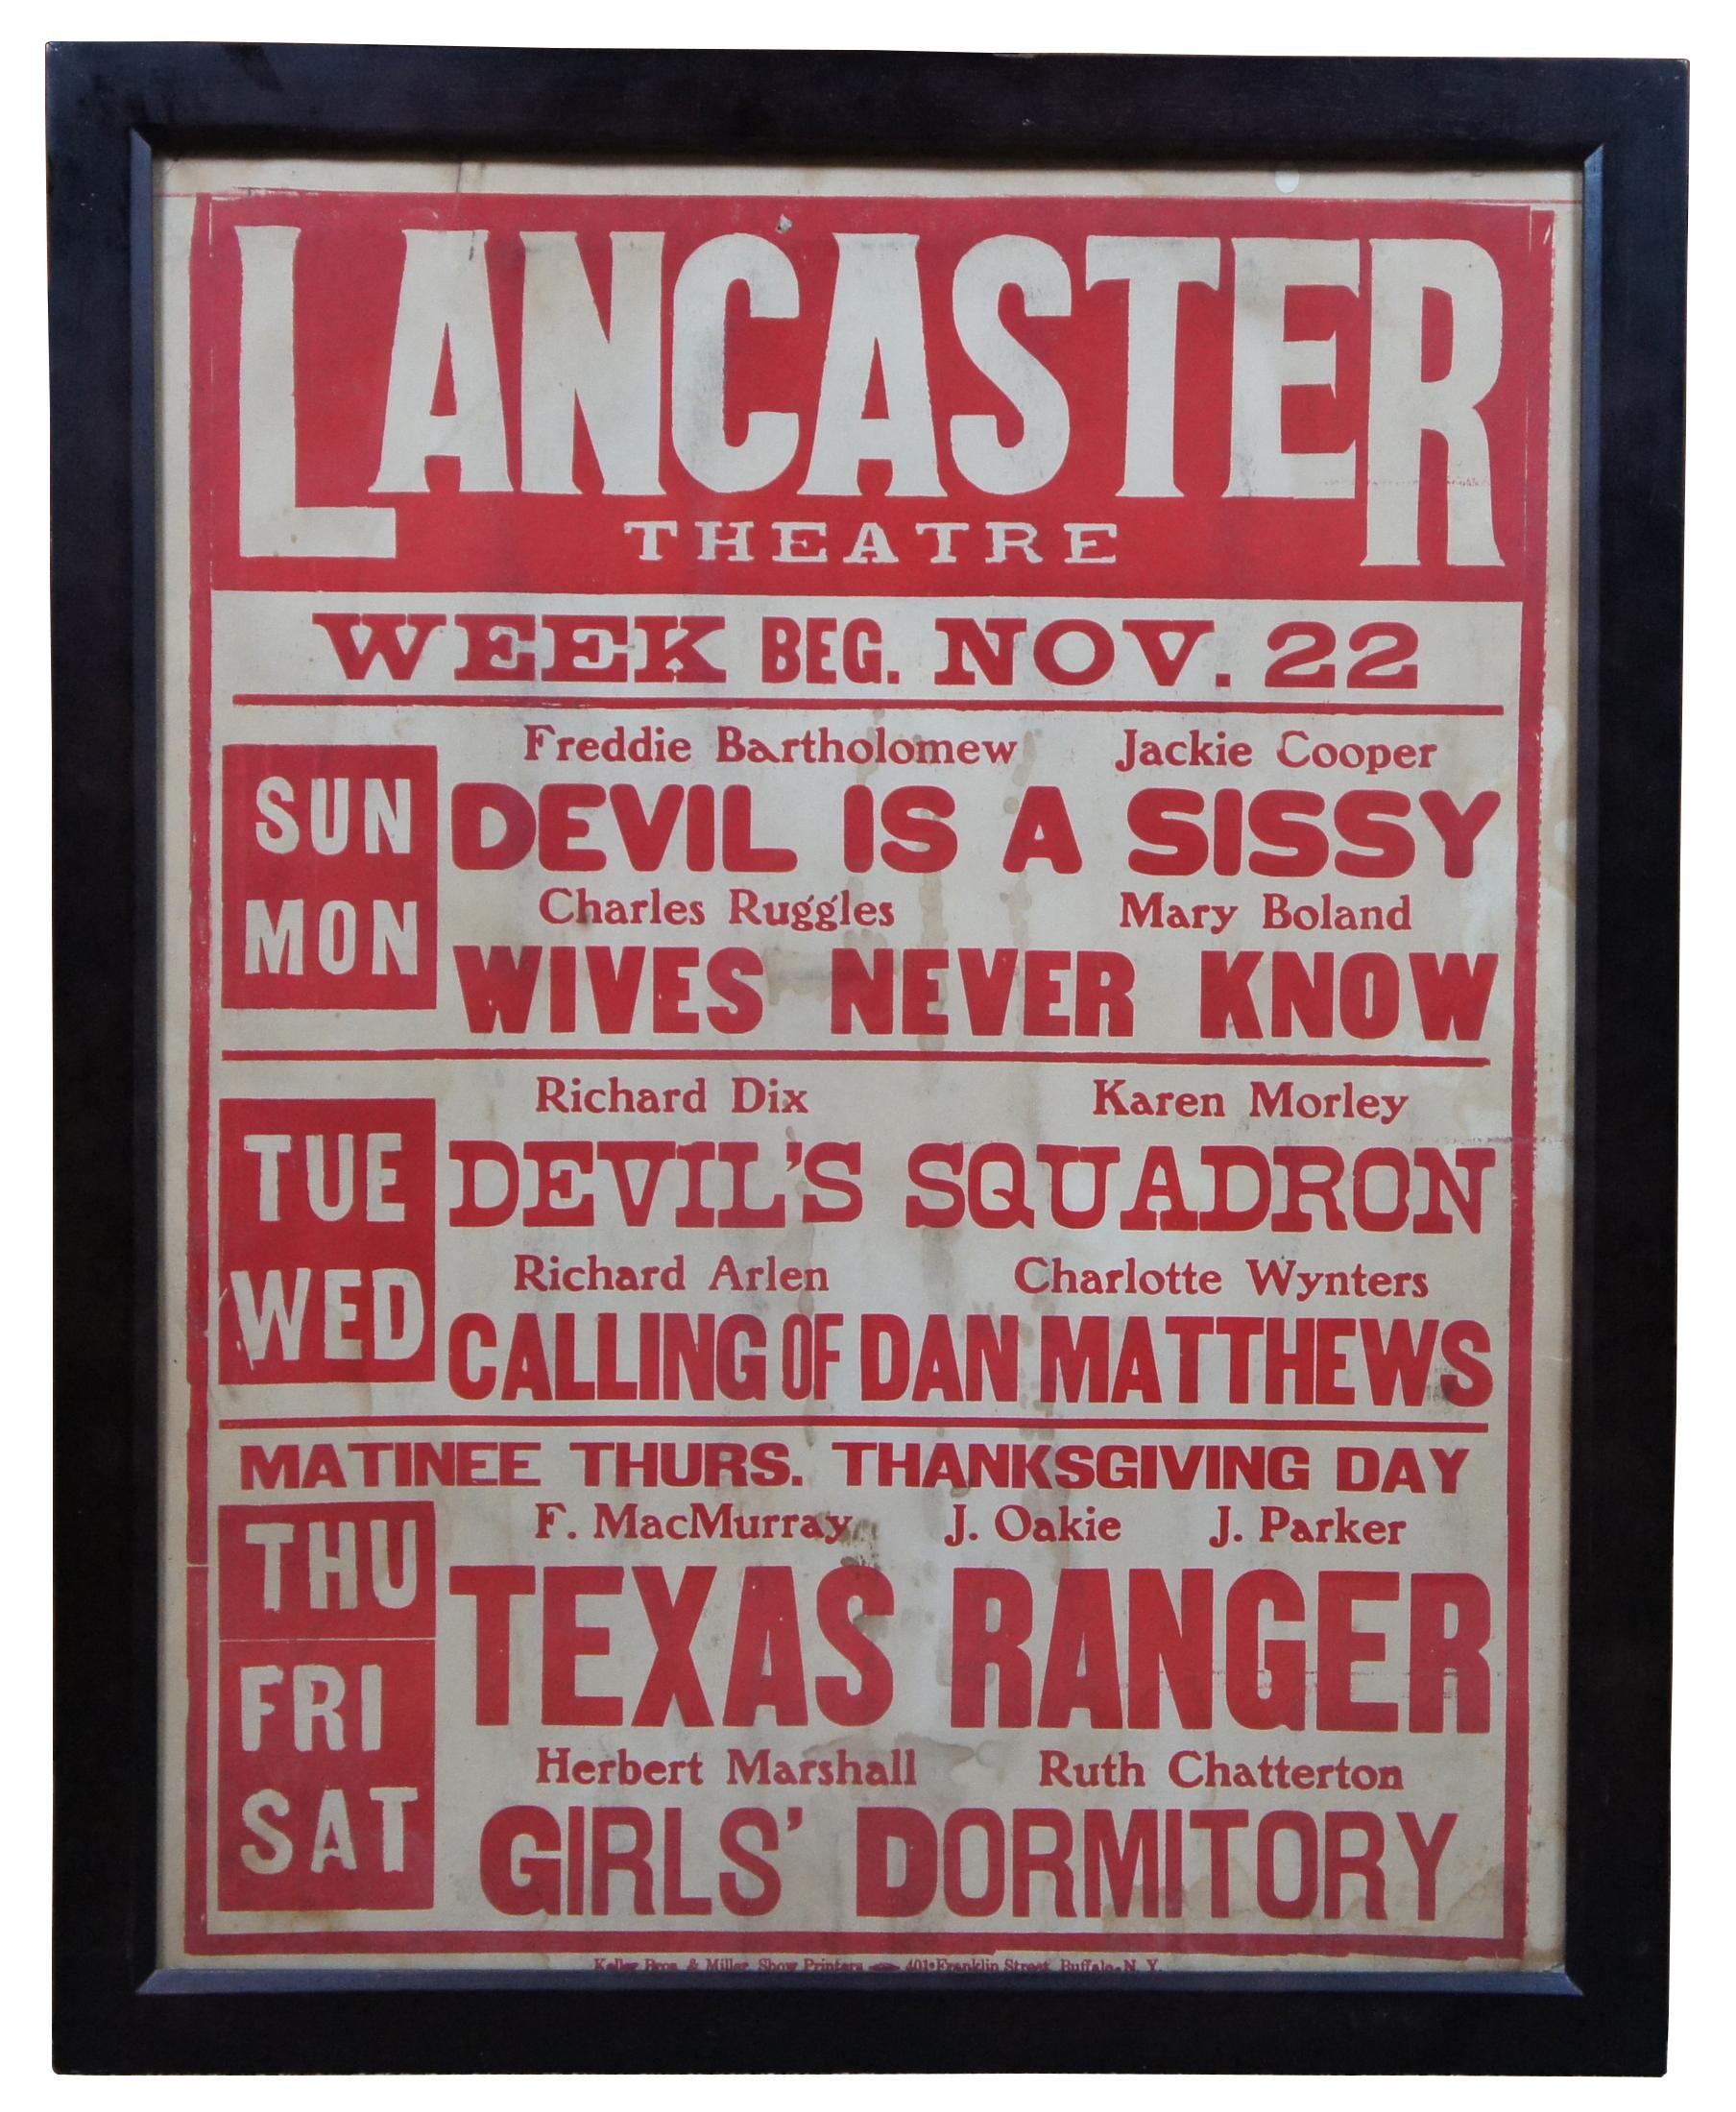 Set of three antique marquee posters for the Lancaster Theatre from 1936, 1937, and 1938, printed by Keller Bros and Miller Poster Printers of Buffalo, NY. Featuring Devil is a Sissy, Wives Never Know, Devils Squadron, Calling of Dan Matthews, Texas